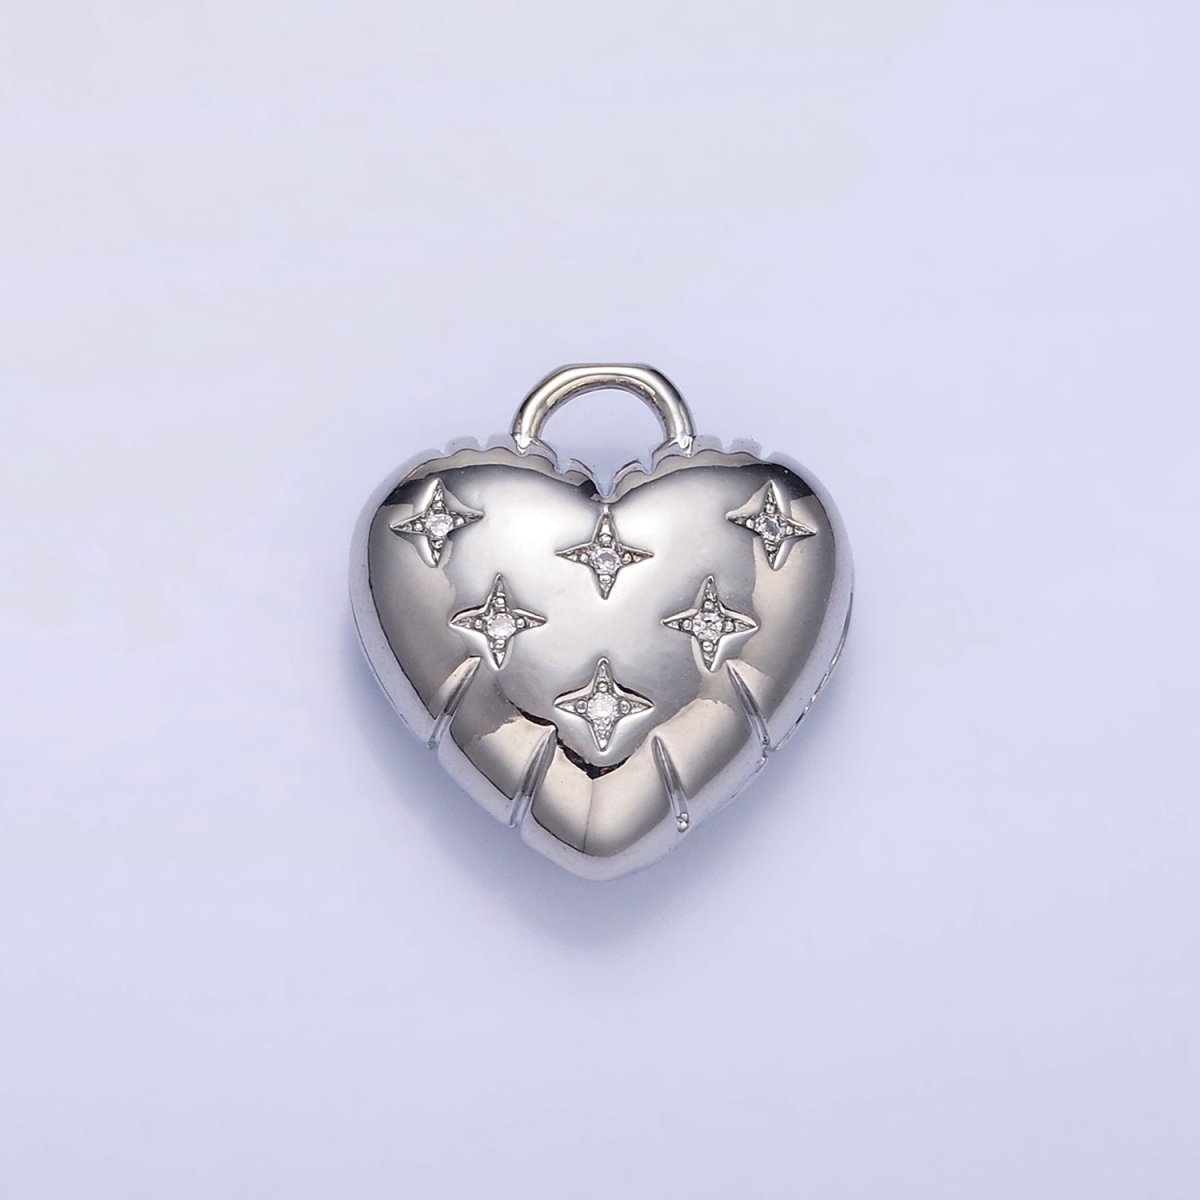 24K Gold Filled Star CZ Puffed Heart Charm in Gold & Silver | H035 - DLUXCA